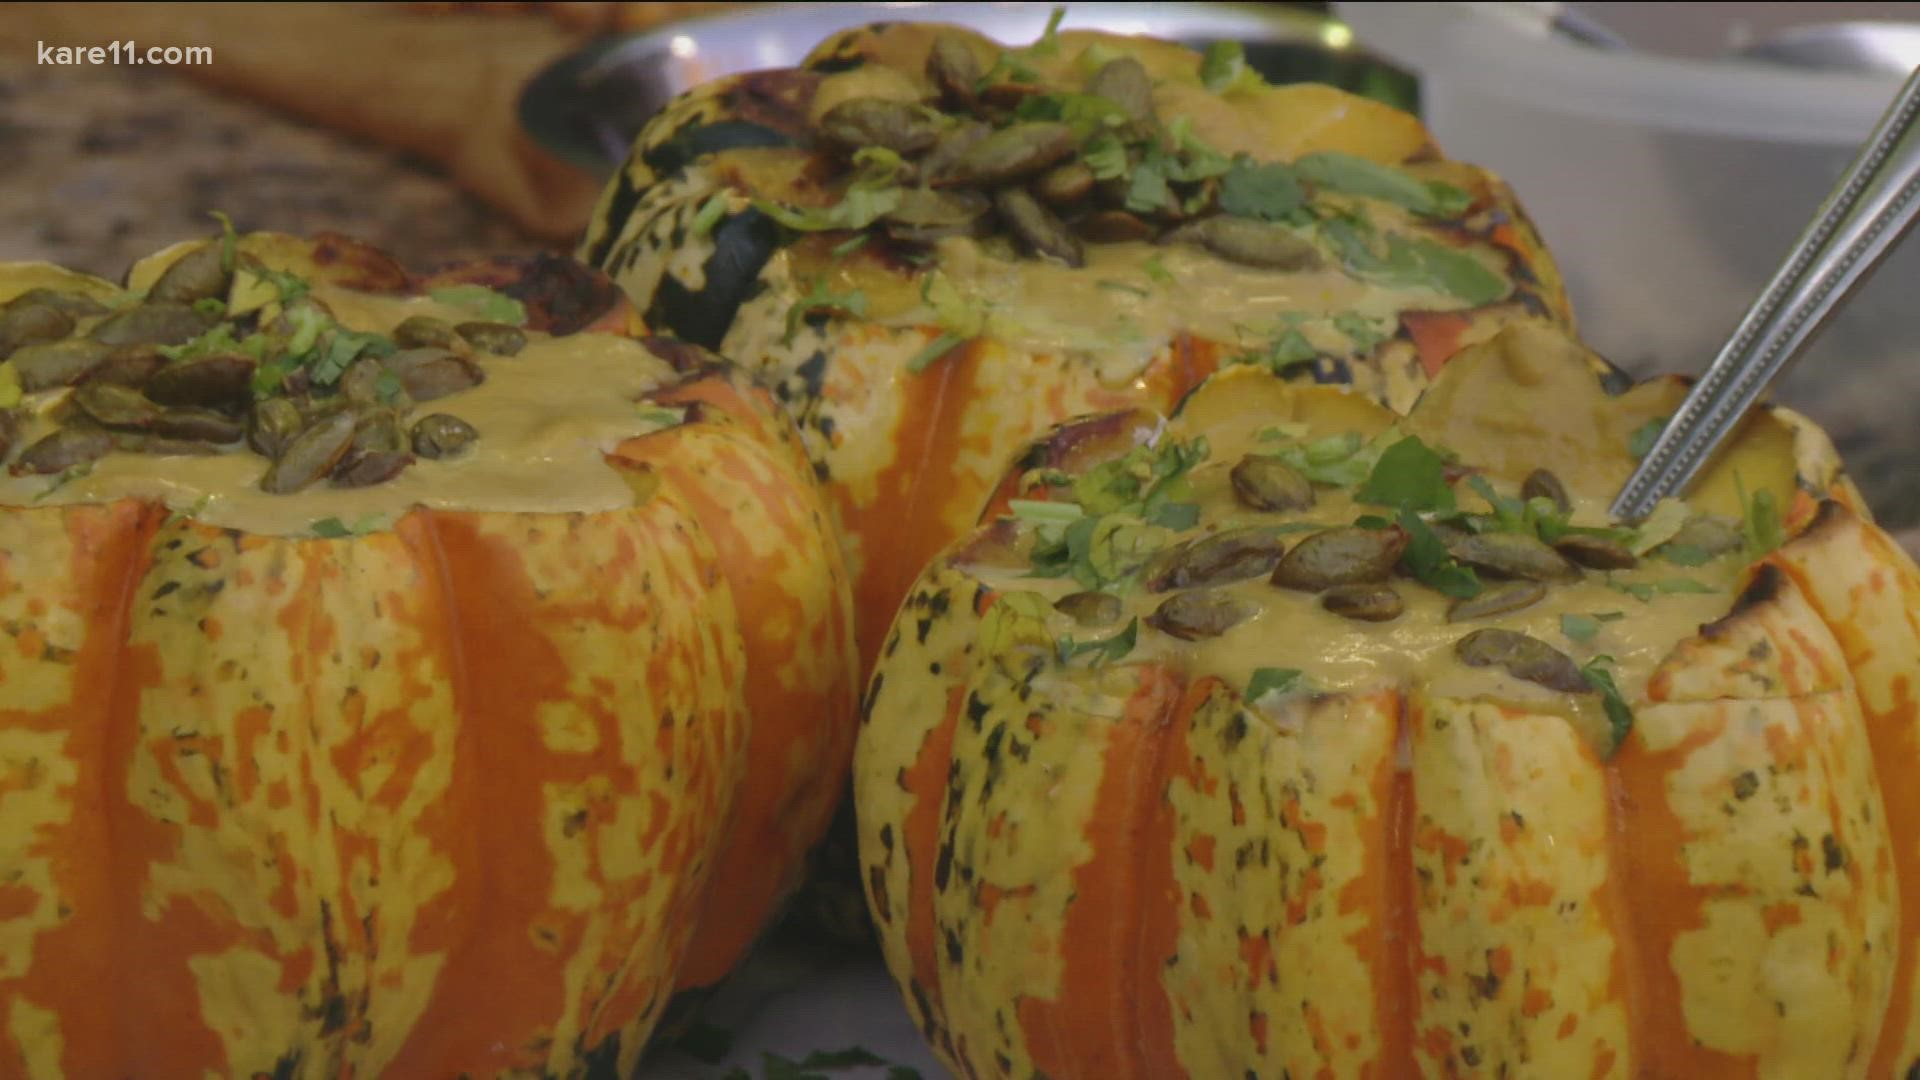 Chef and squash expert Jenny Thull shared two tasty squash recipes on KARE 11 Saturday.